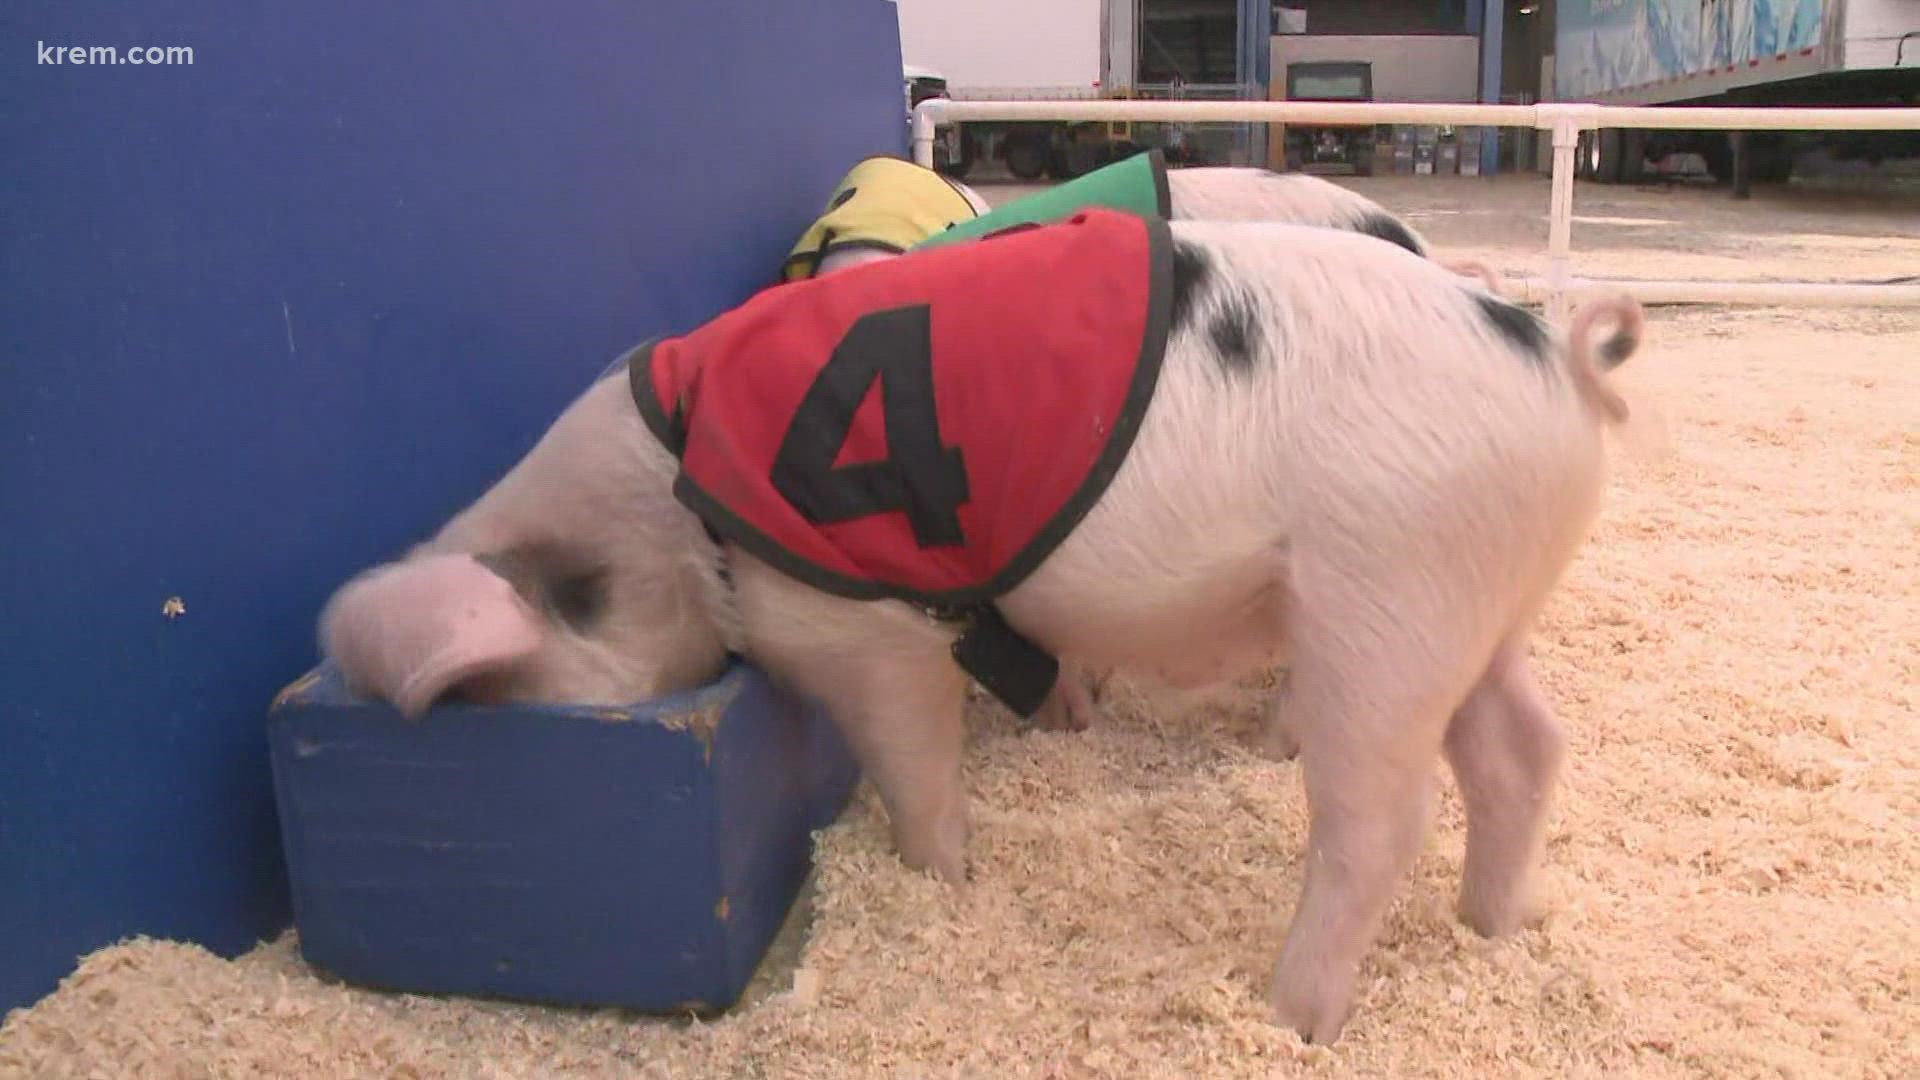 Pig racing is featured at this year's Spokane County Fair starting on Friday, September 10.